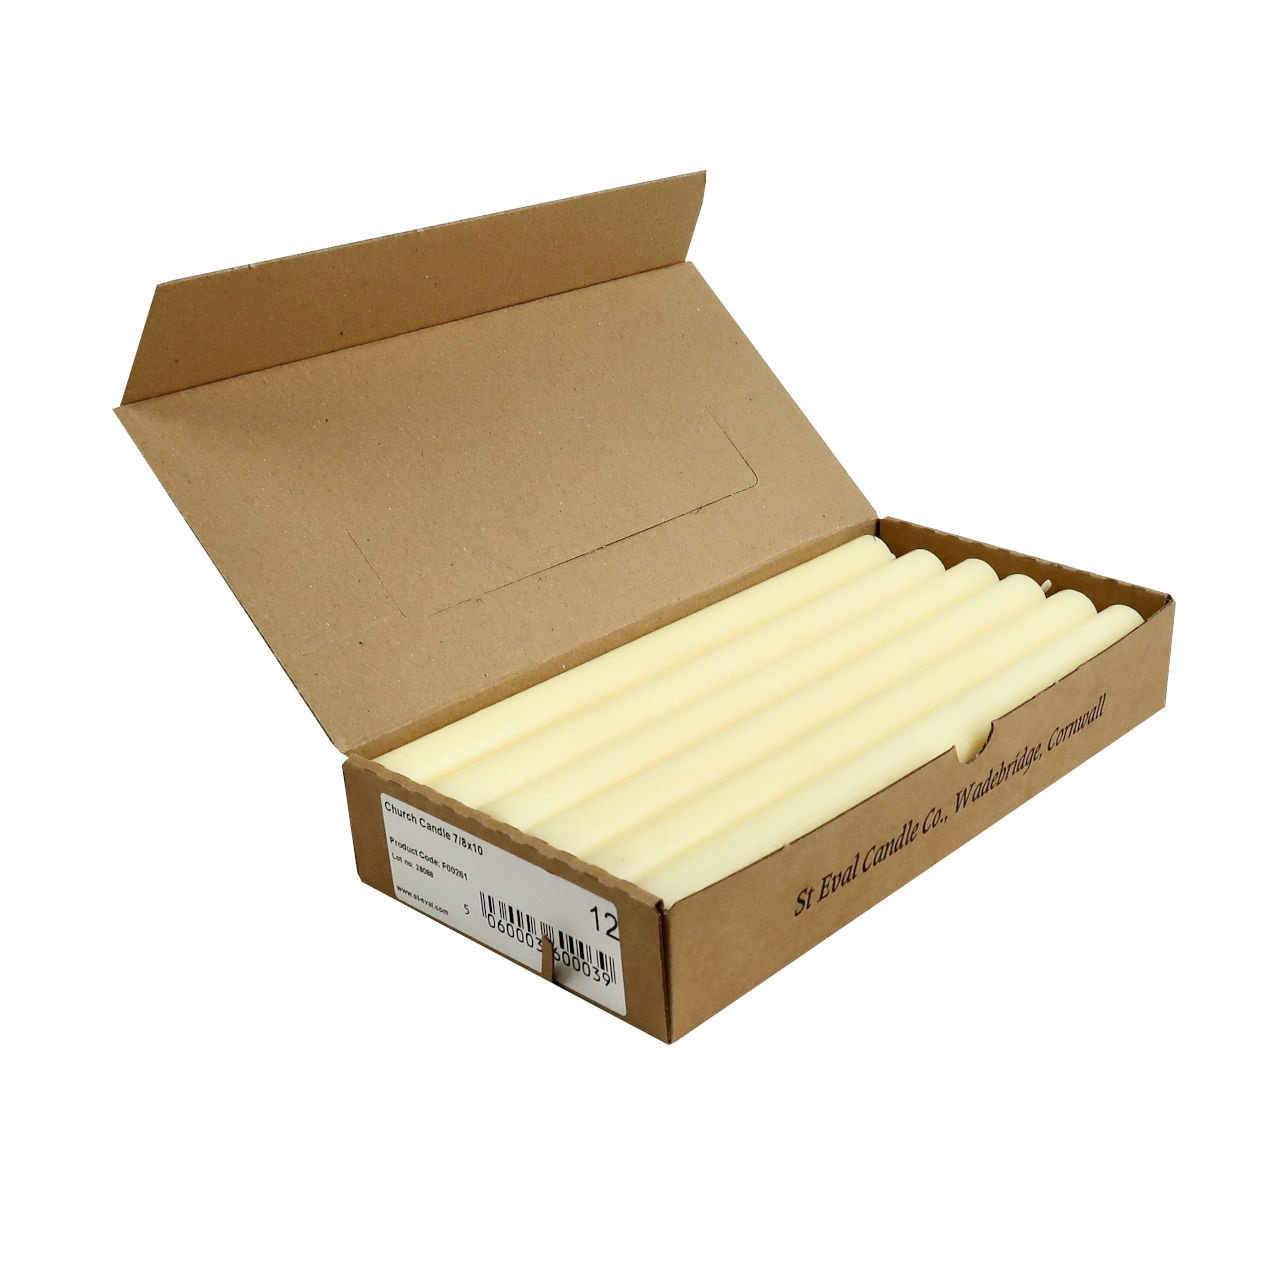 St Eval Candle Company Box of 12 Ivory Dinner Candles 